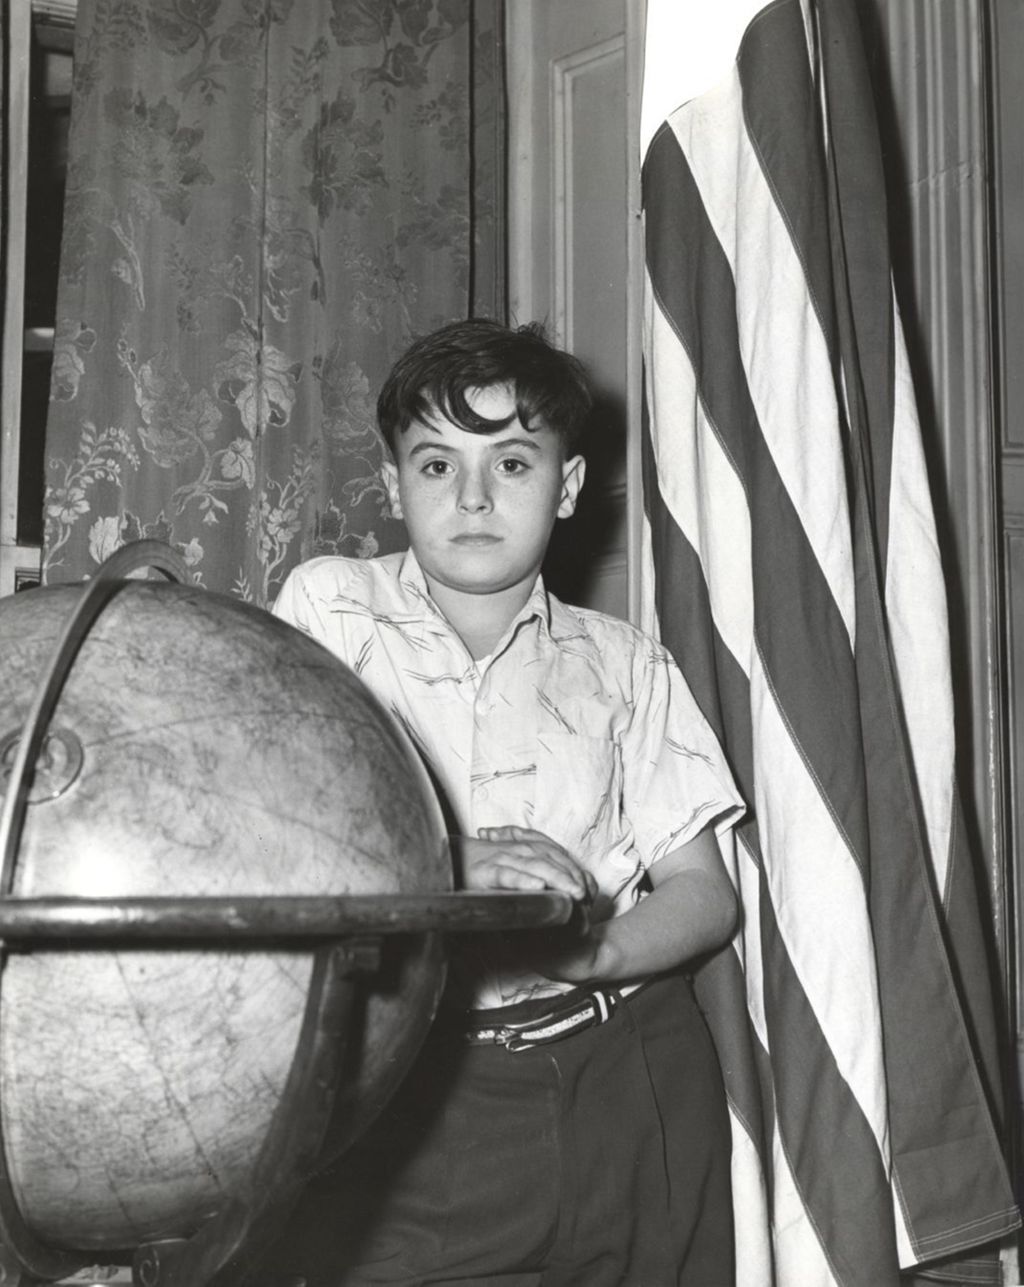 Miniature of Boy standing with globe and U.S. flag